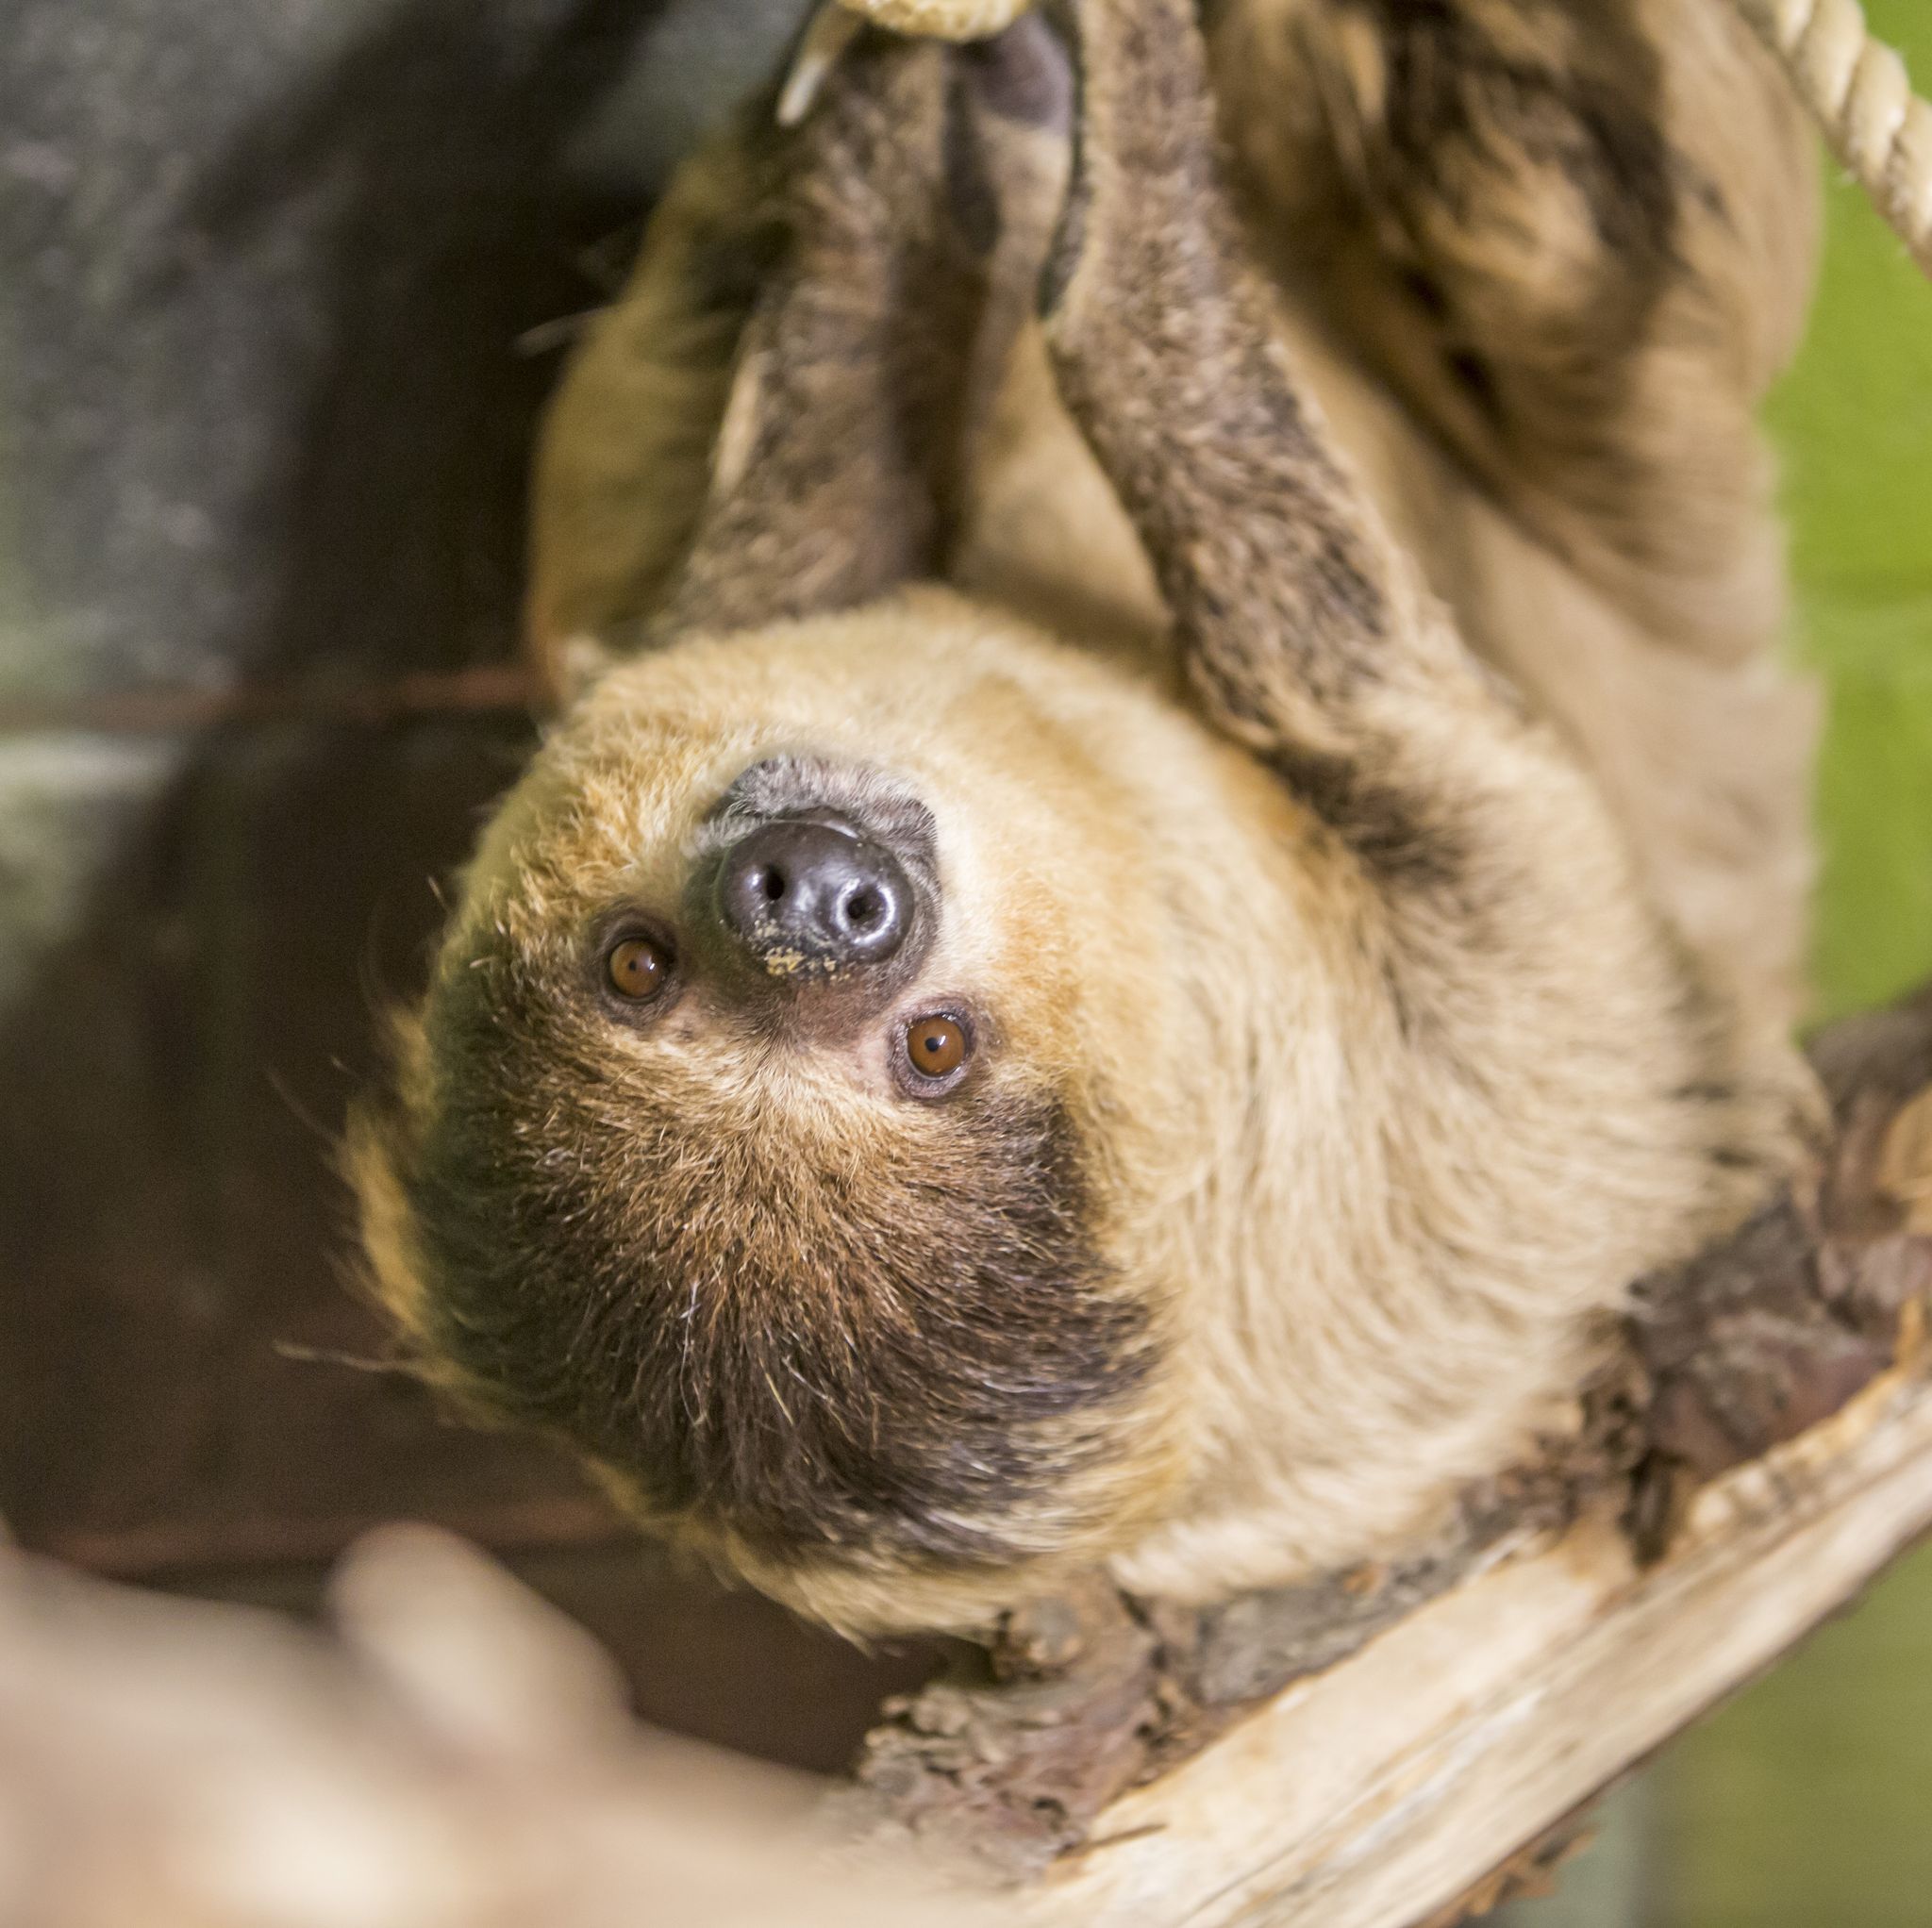 Sloth retirement home opens in wales and you can visit